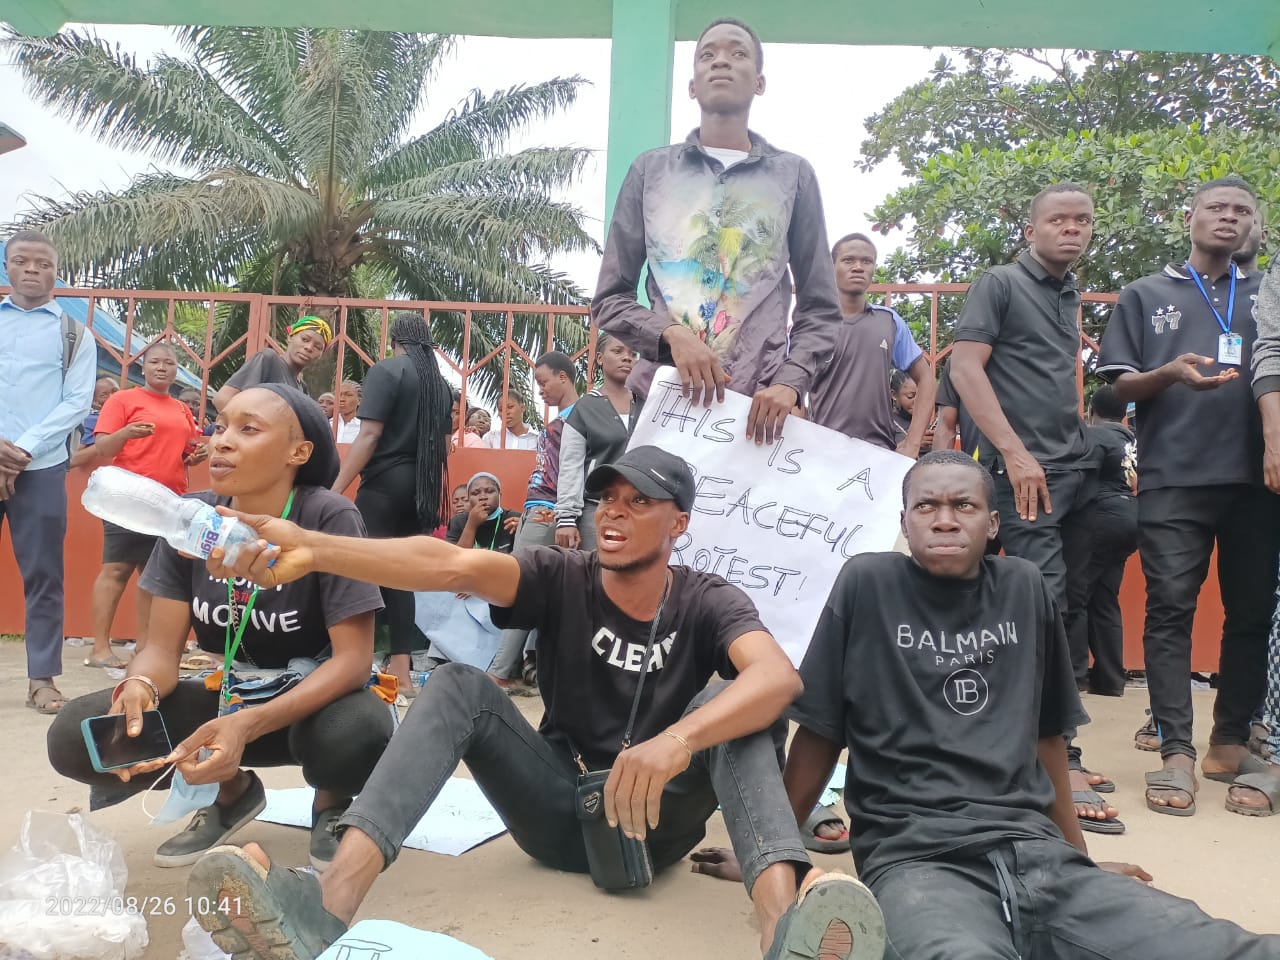 Niger Delta Students' Protest: Questions for Amnesty office and Novena University authority